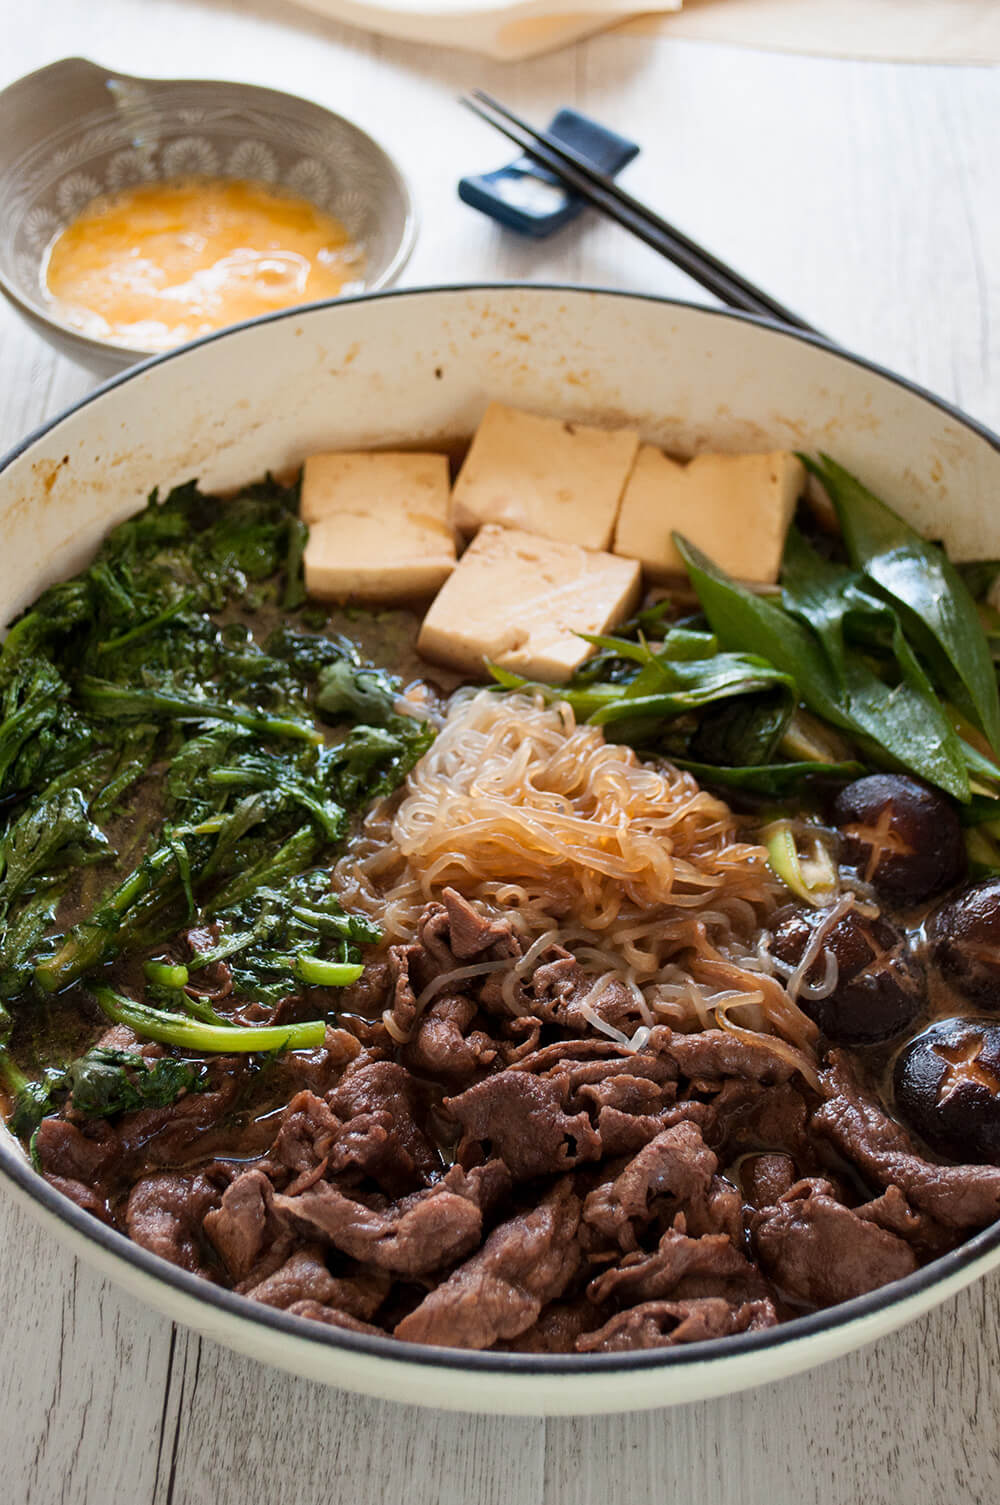 One of the most popular Japanese hot pot dishes, sukiyaki (すき焼き) is great for get-together with friends and family. Cooking thinly sliced beef, tofu and vegetables in sweet soy sauce flavour over a portable cooktop on the table is so much fun. It is quick to prepare and so tasty.